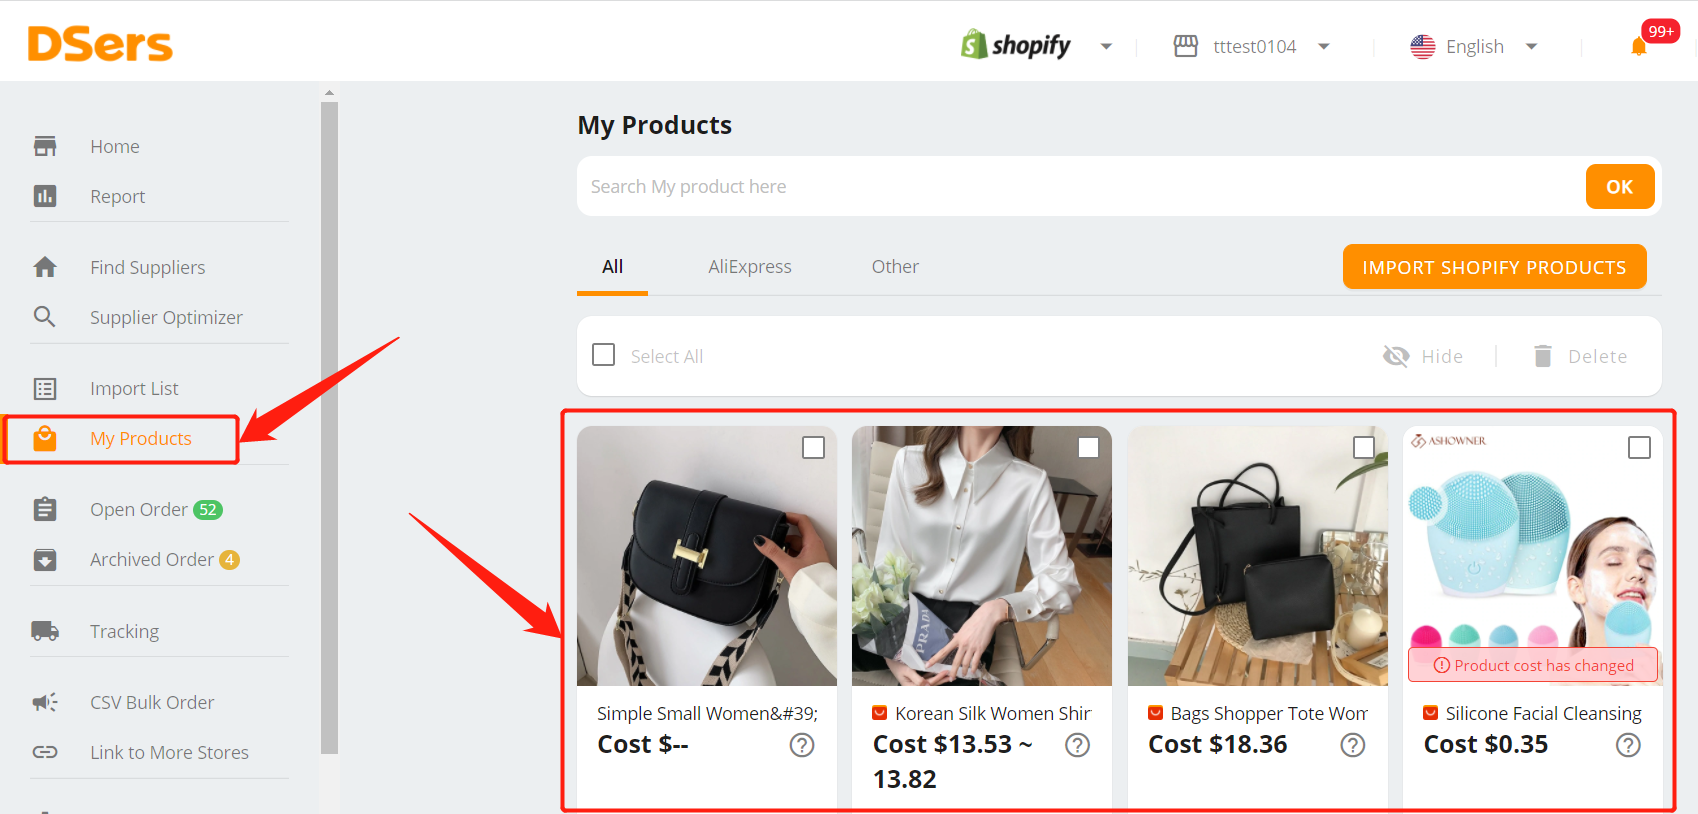 Connect AliExpress suppliers to your products - Access My Products - Shopify DSers